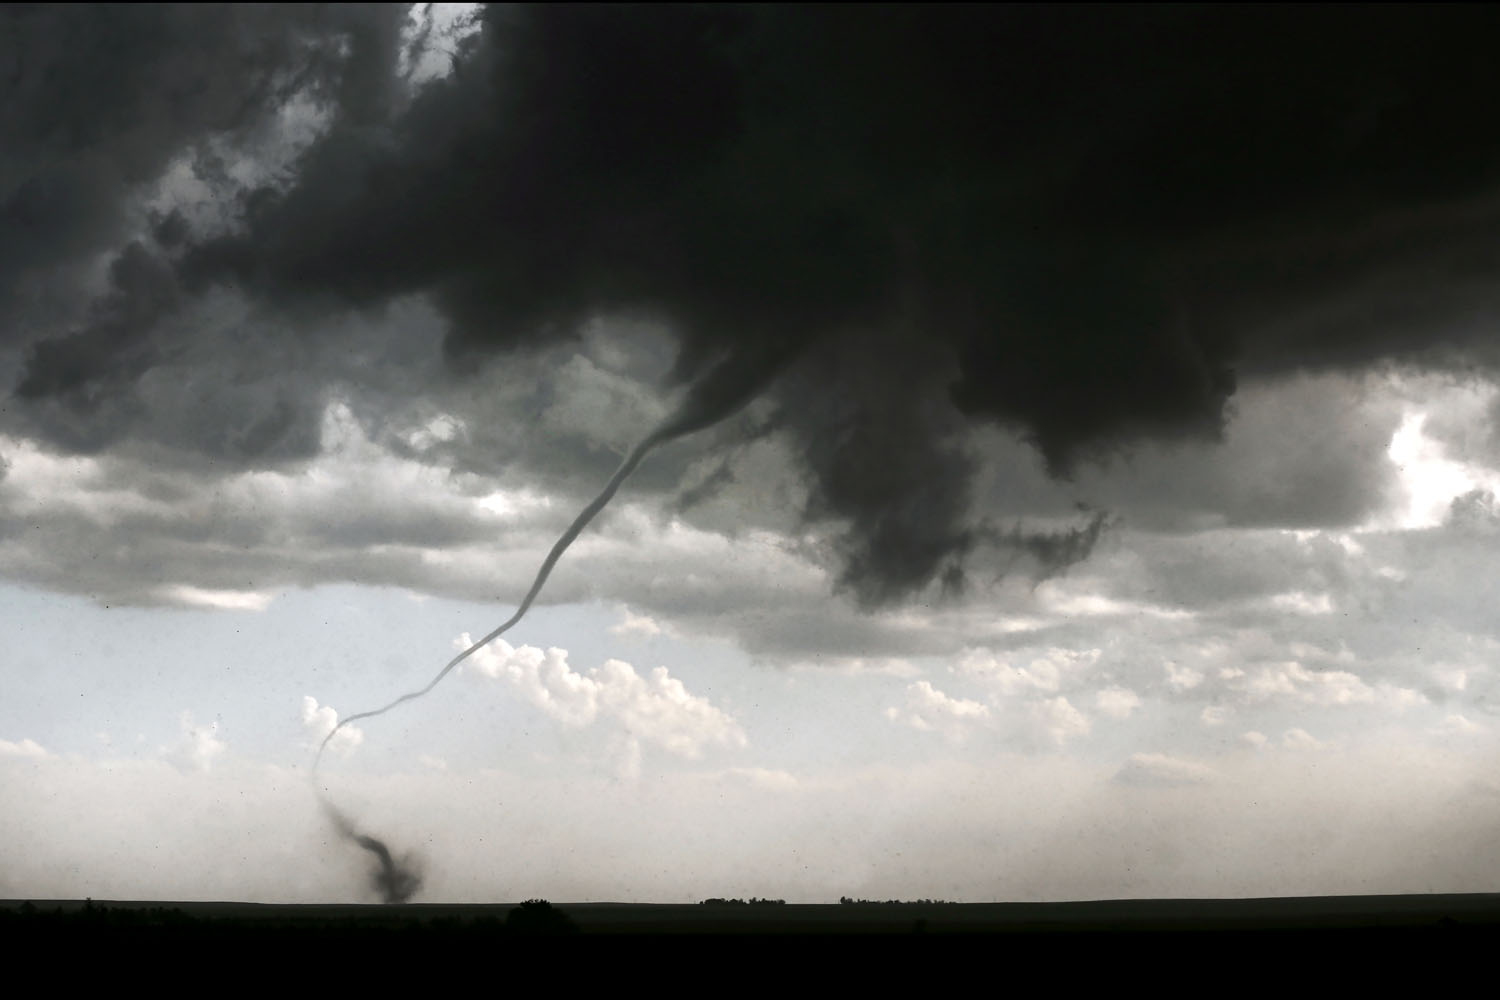 May 7, 2014. A tornado touches down in a field in Akron, Colo. during a severe weather outbreak.